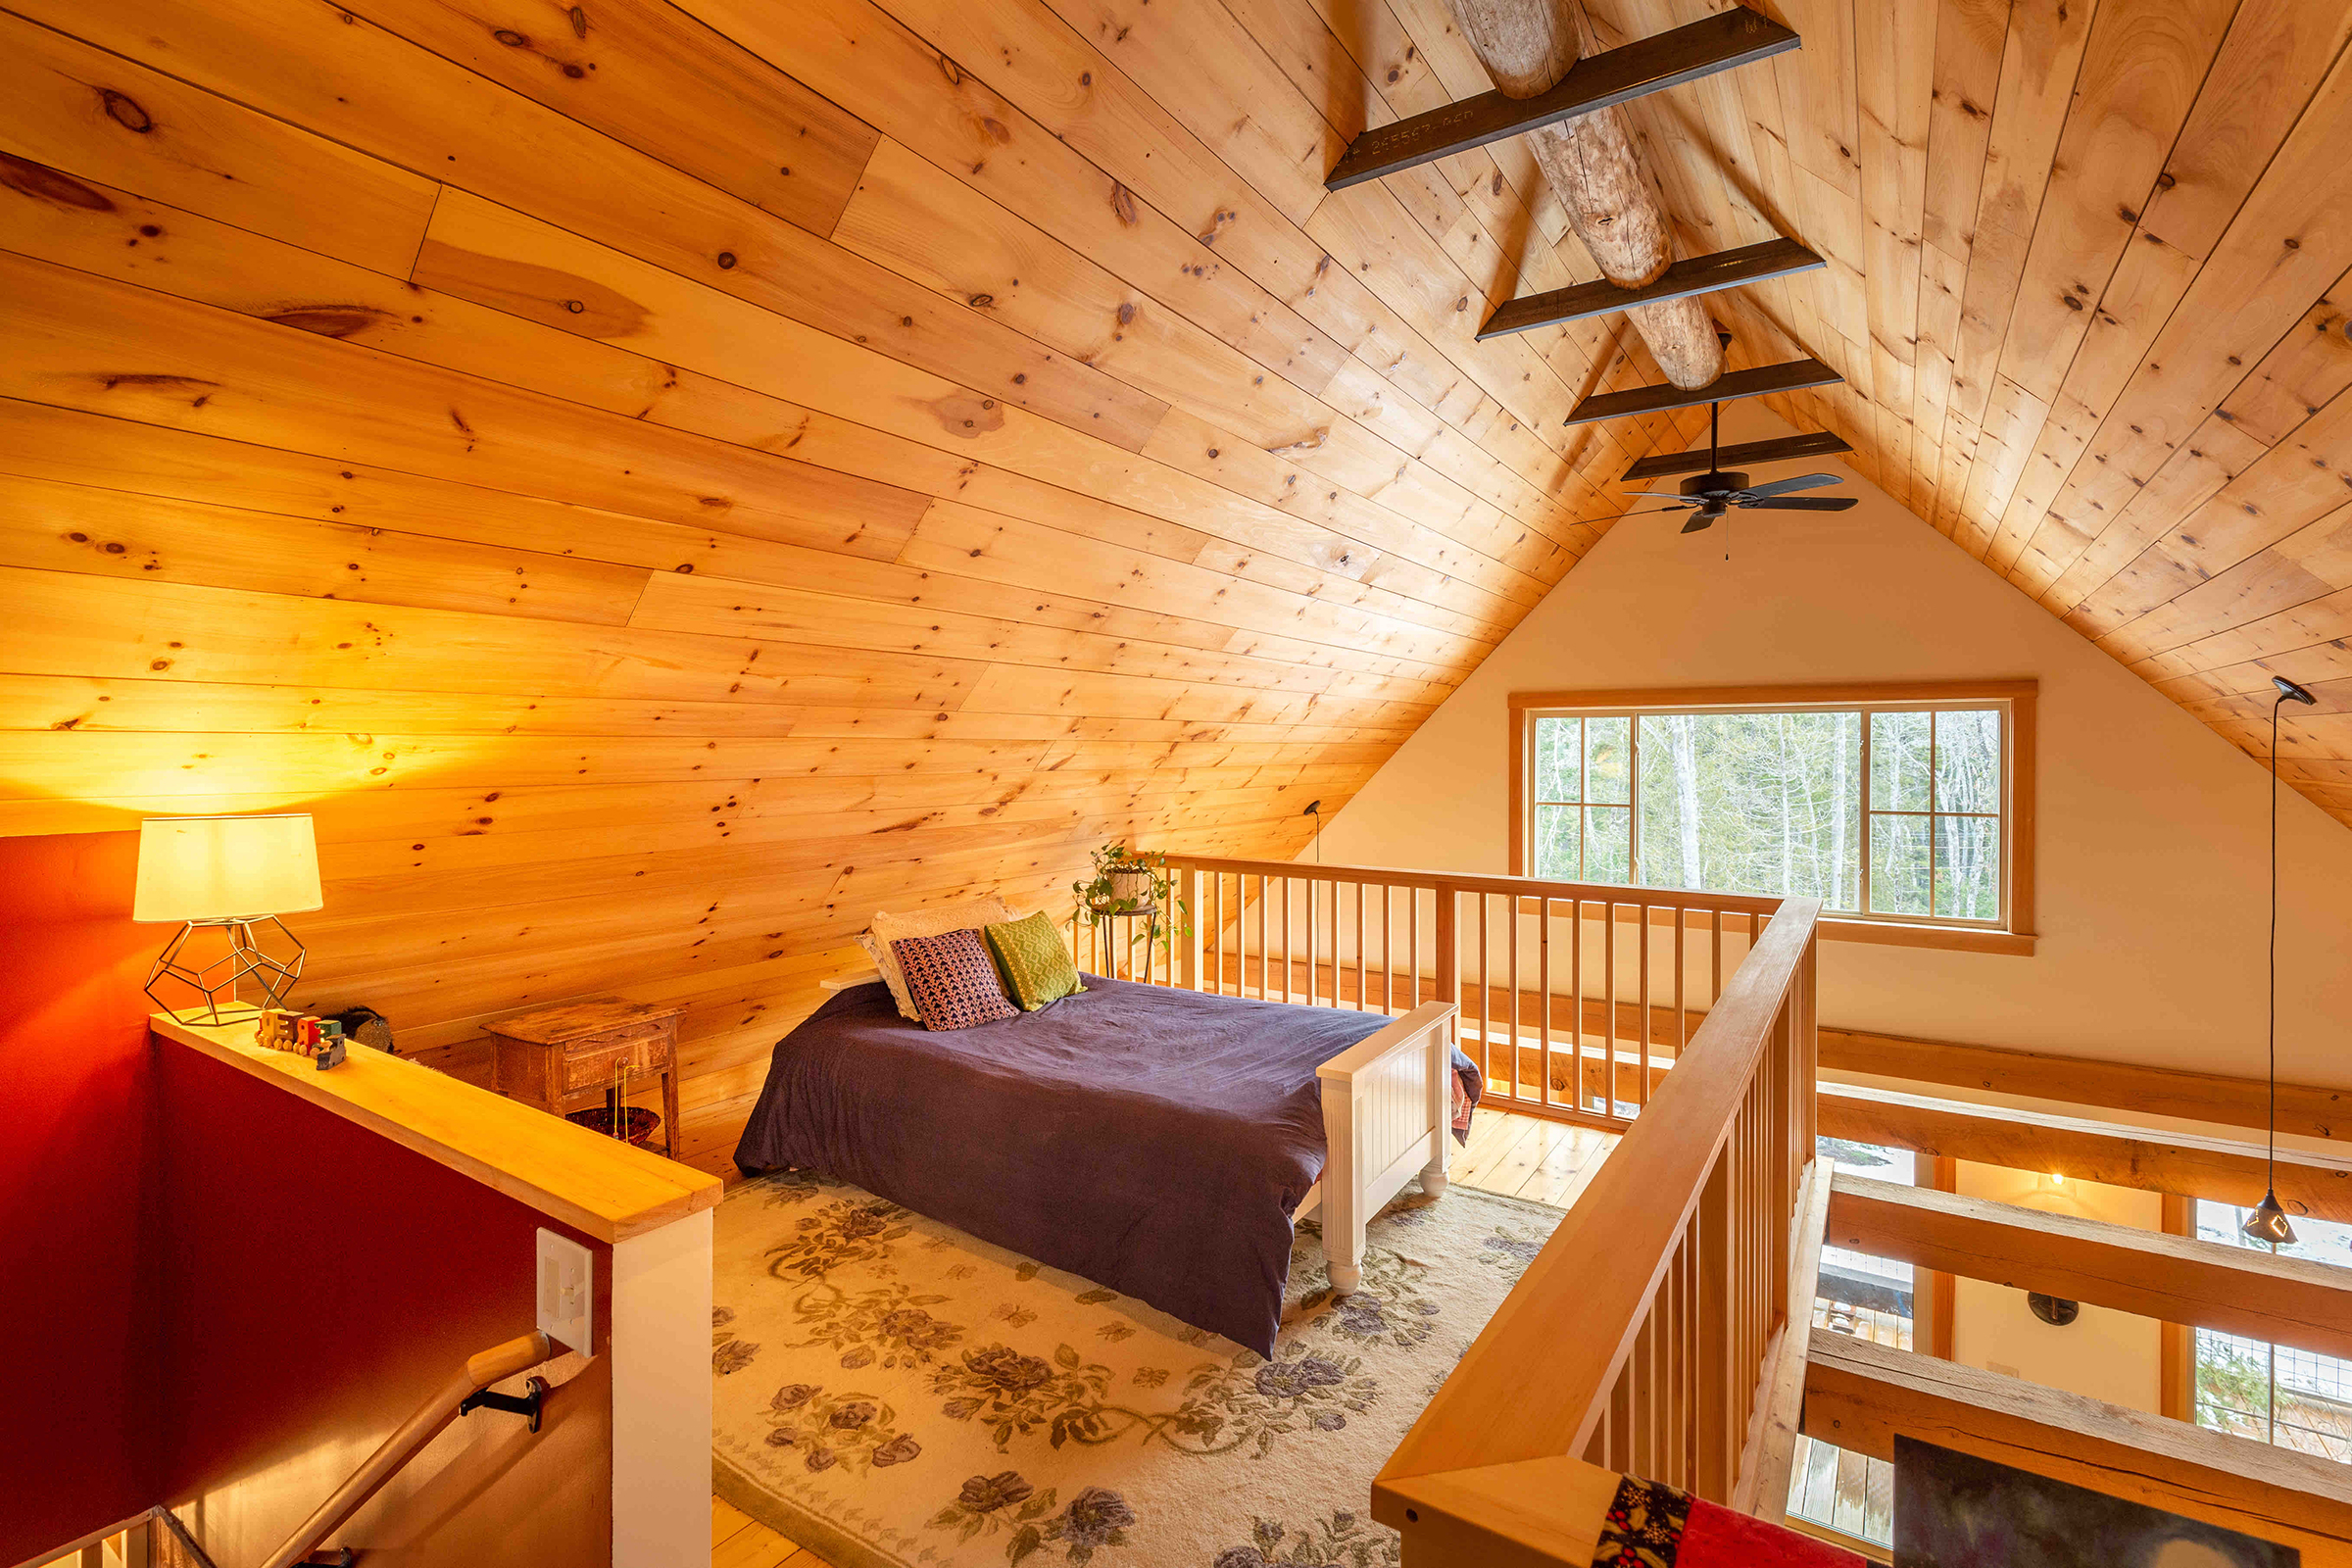 Bedroom loft view of the Sunny New Home in Acadia National Park, Maine